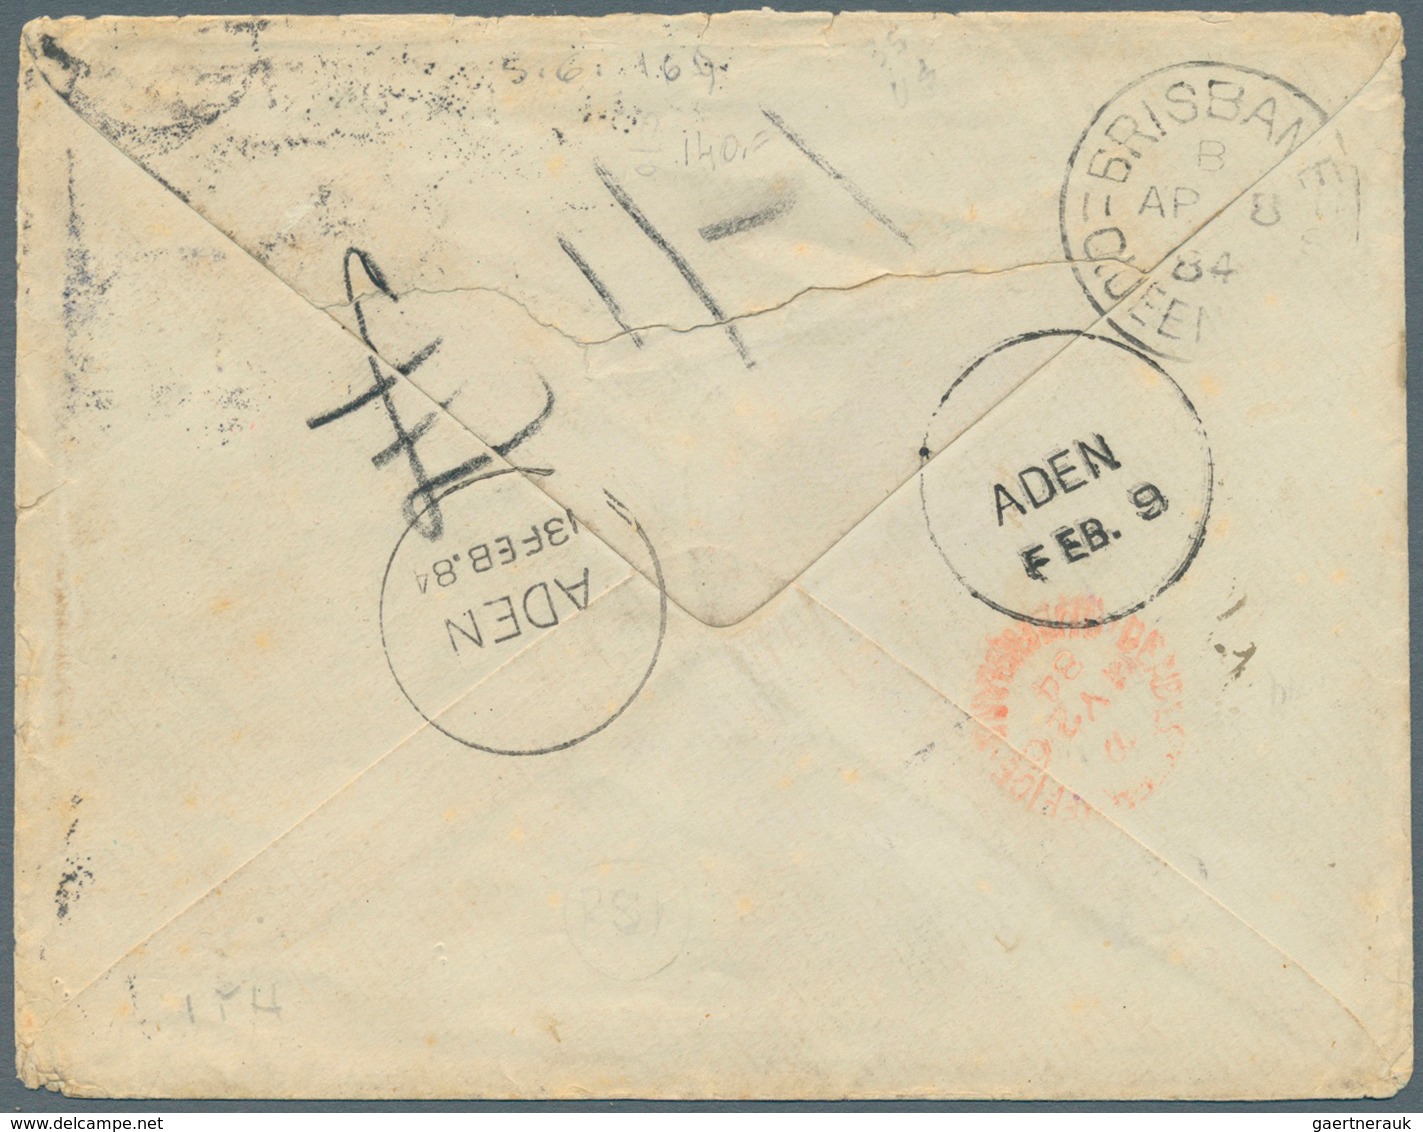 Aden: 1884-85 Cover From London Addressed To ADEN, Redirected To BRISBANE, QUEENSLAND Franked GB 5d. - Yemen